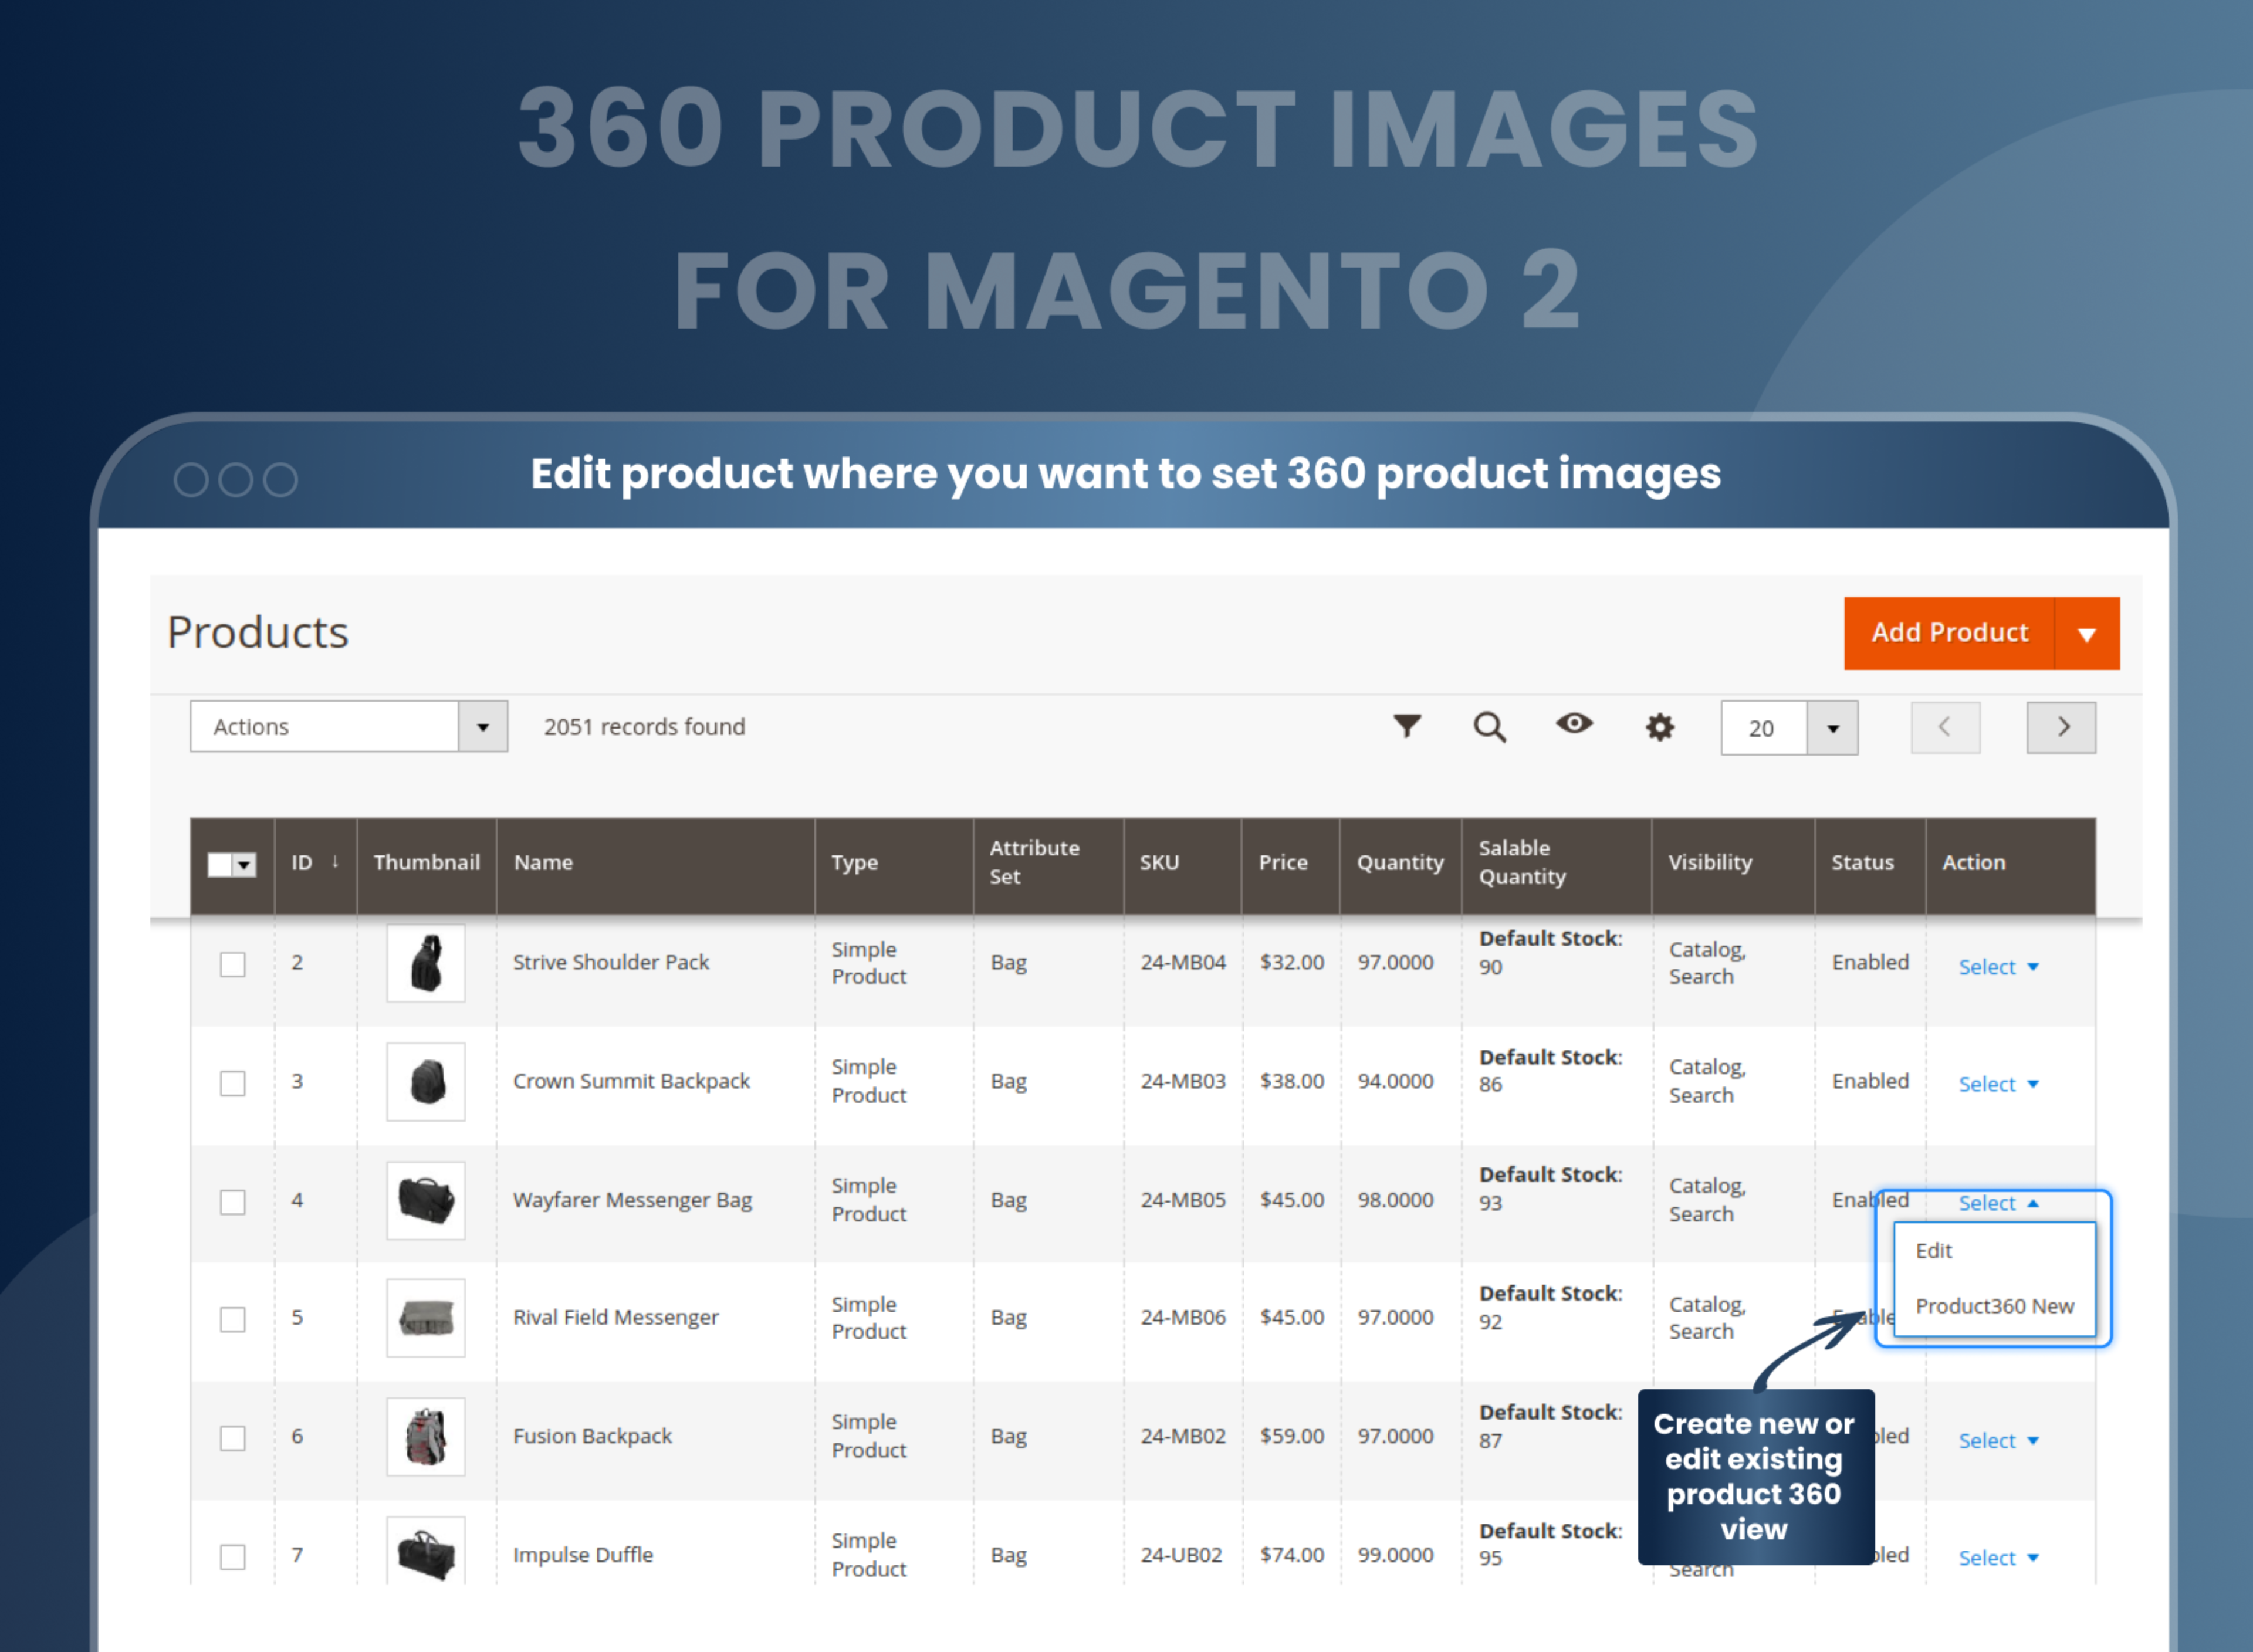 Edit product where you want to set 360 product images